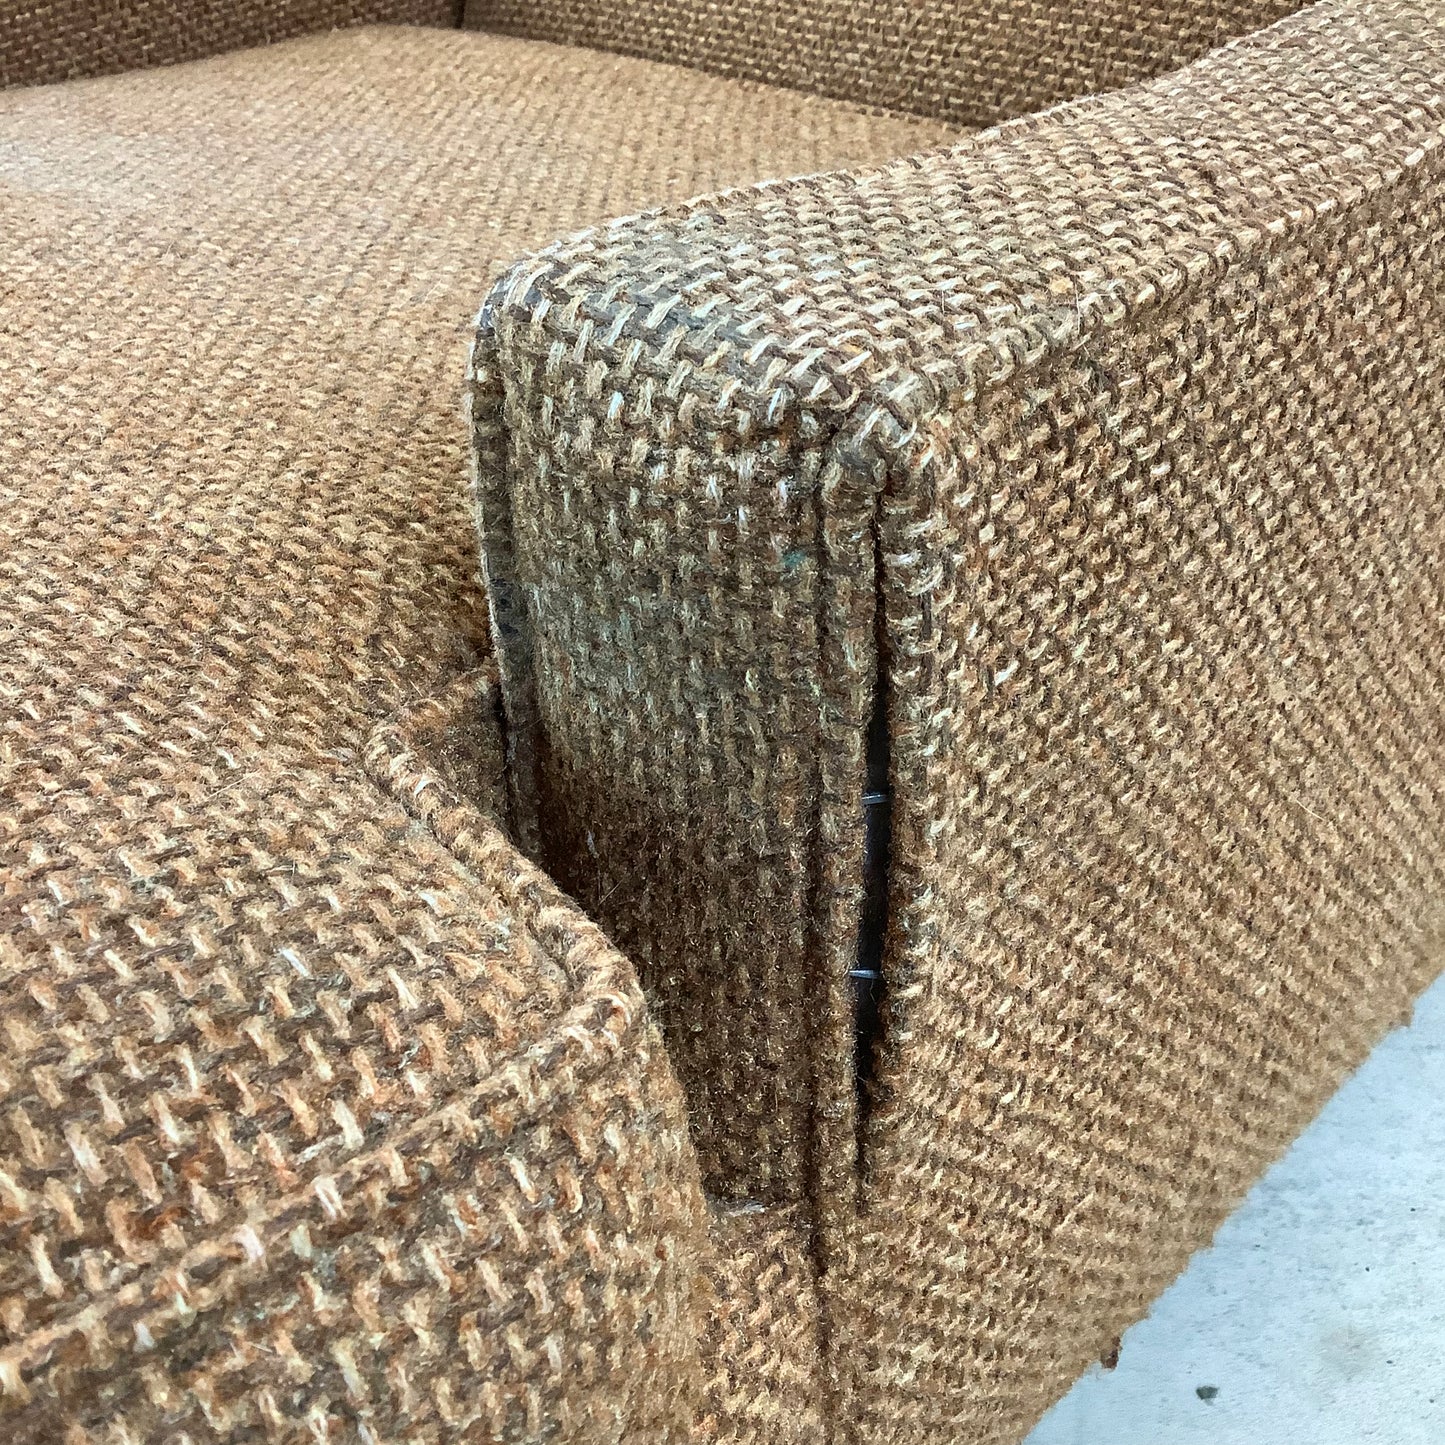 Mid-Century Upholstered Lounge Chair